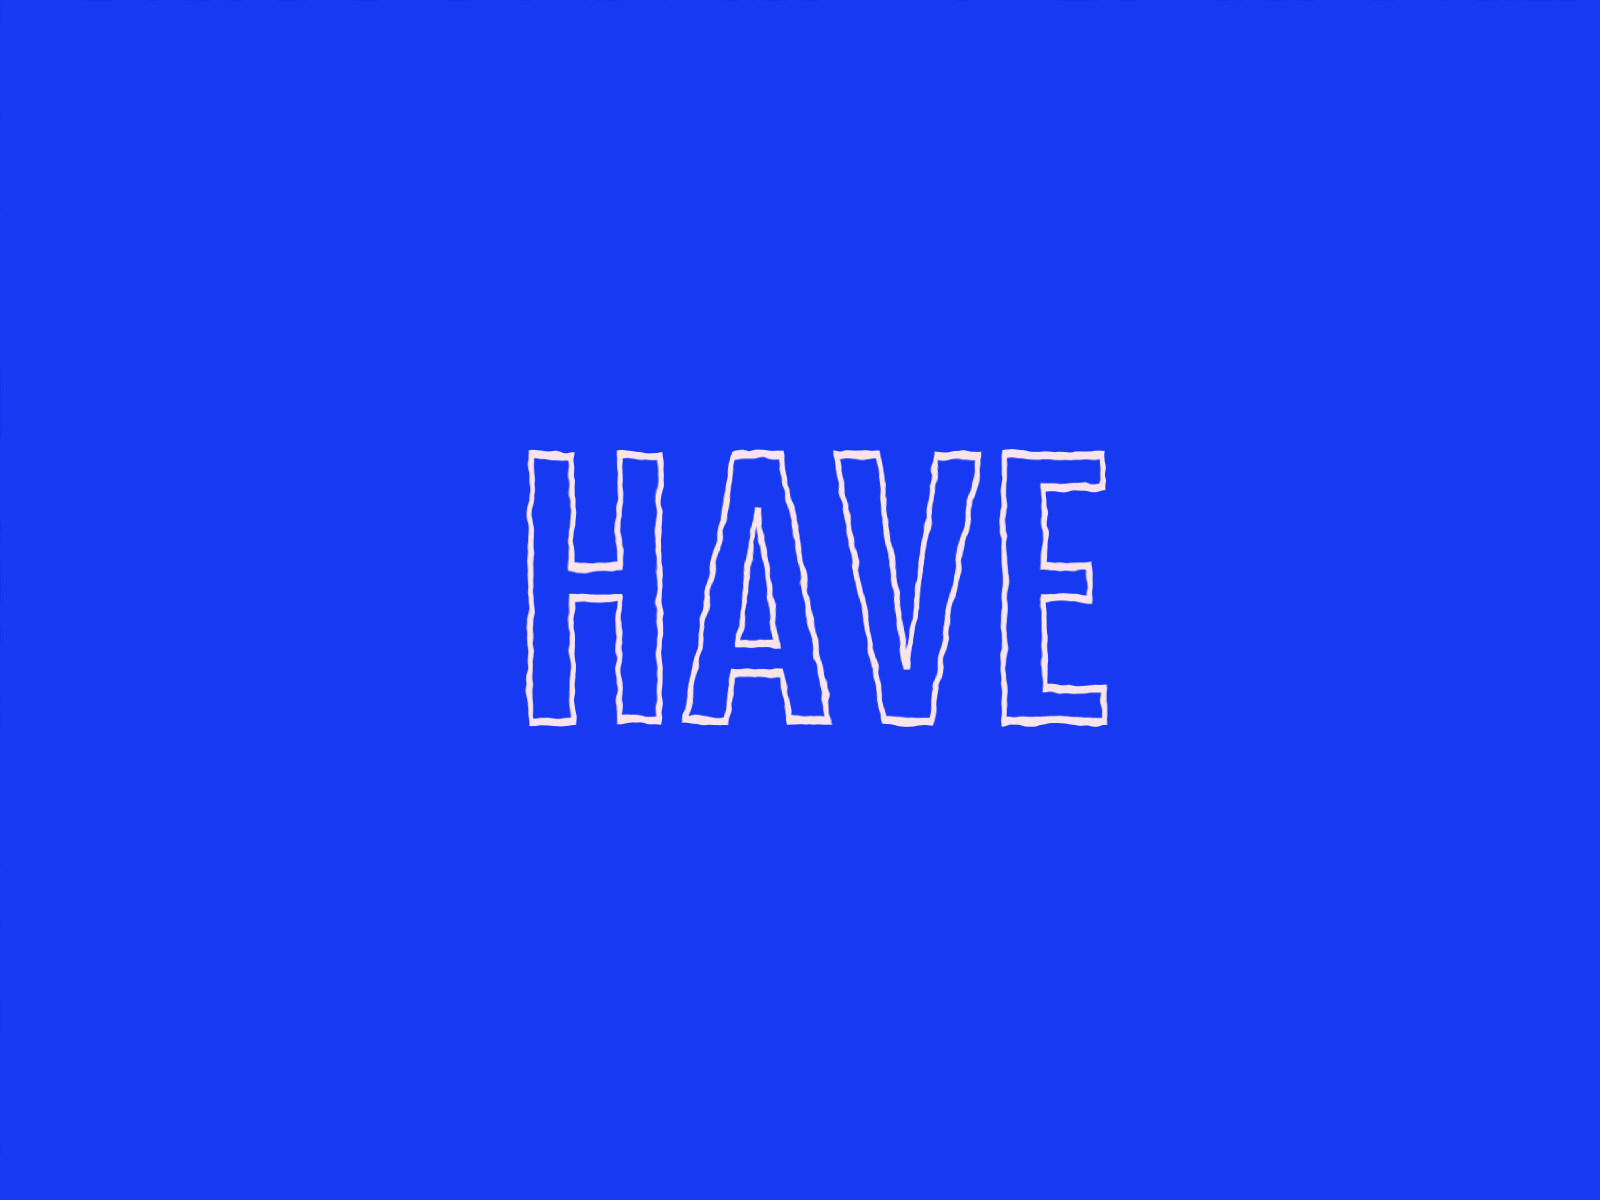 Have Fun... after effects aftereffects animated animated gif animatedgif animation branding design flat illustration minimal minimalist motion design motion graphics typography vector video games videogames